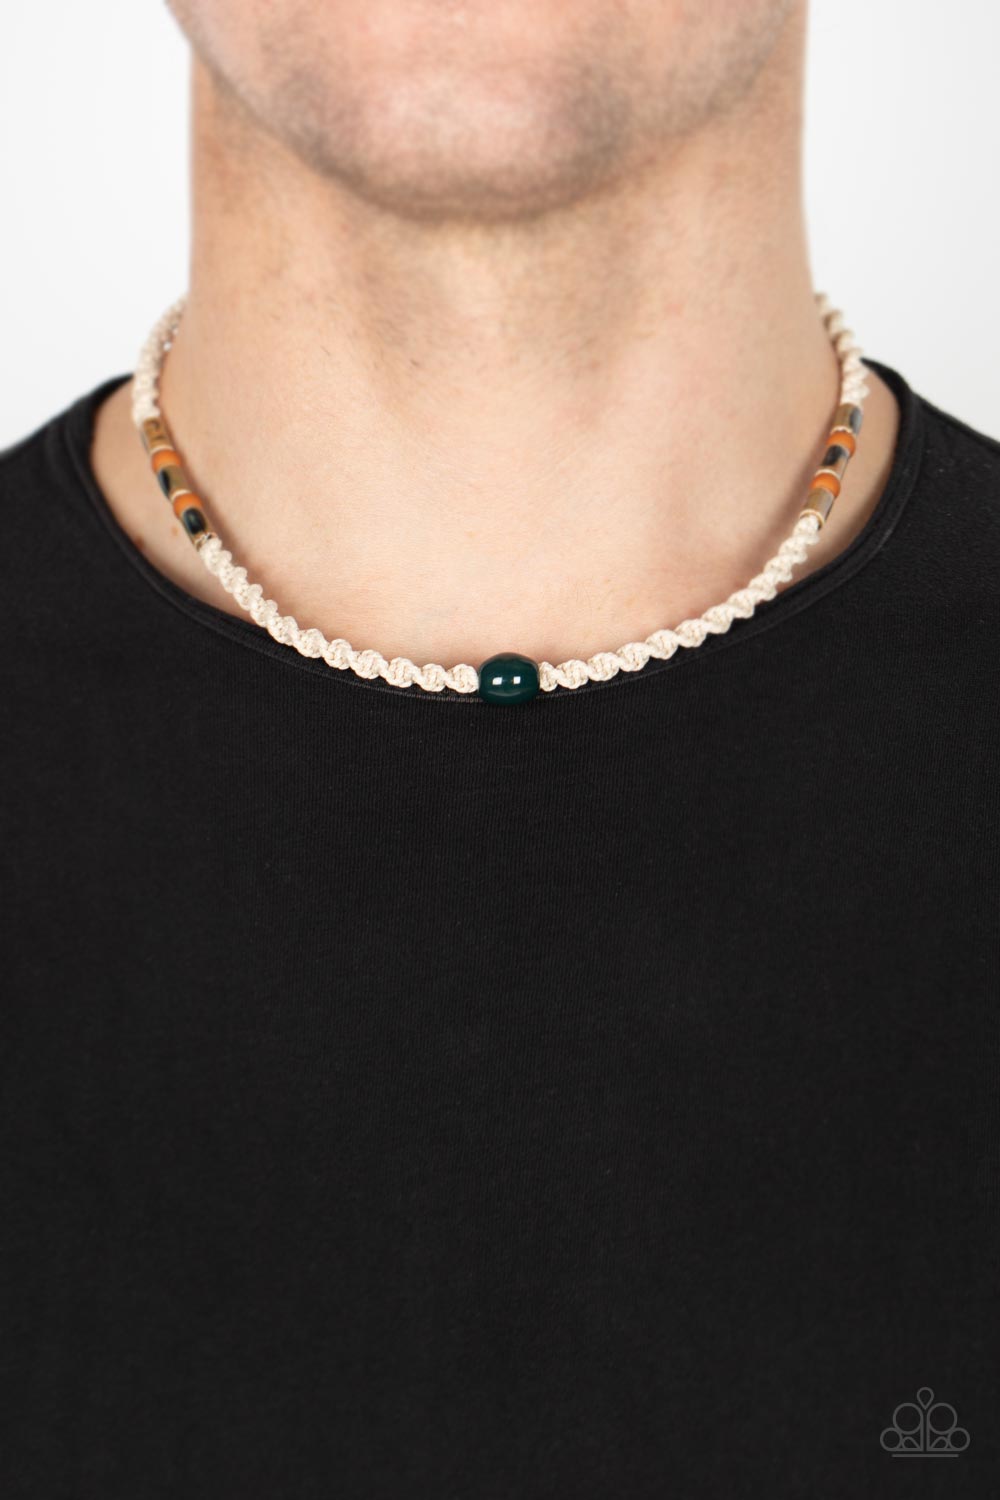 Positively Pacific - Brown and Green - Earthy Urban Necklace - Paparazzi Accessories - Urban necklace with glazed, matte, and polished finishes, an earthy collection of brown and green beads are knotted in place along a braided twine-like cord below the collar, creating an authentically urban centerpiece. Button loop closure.